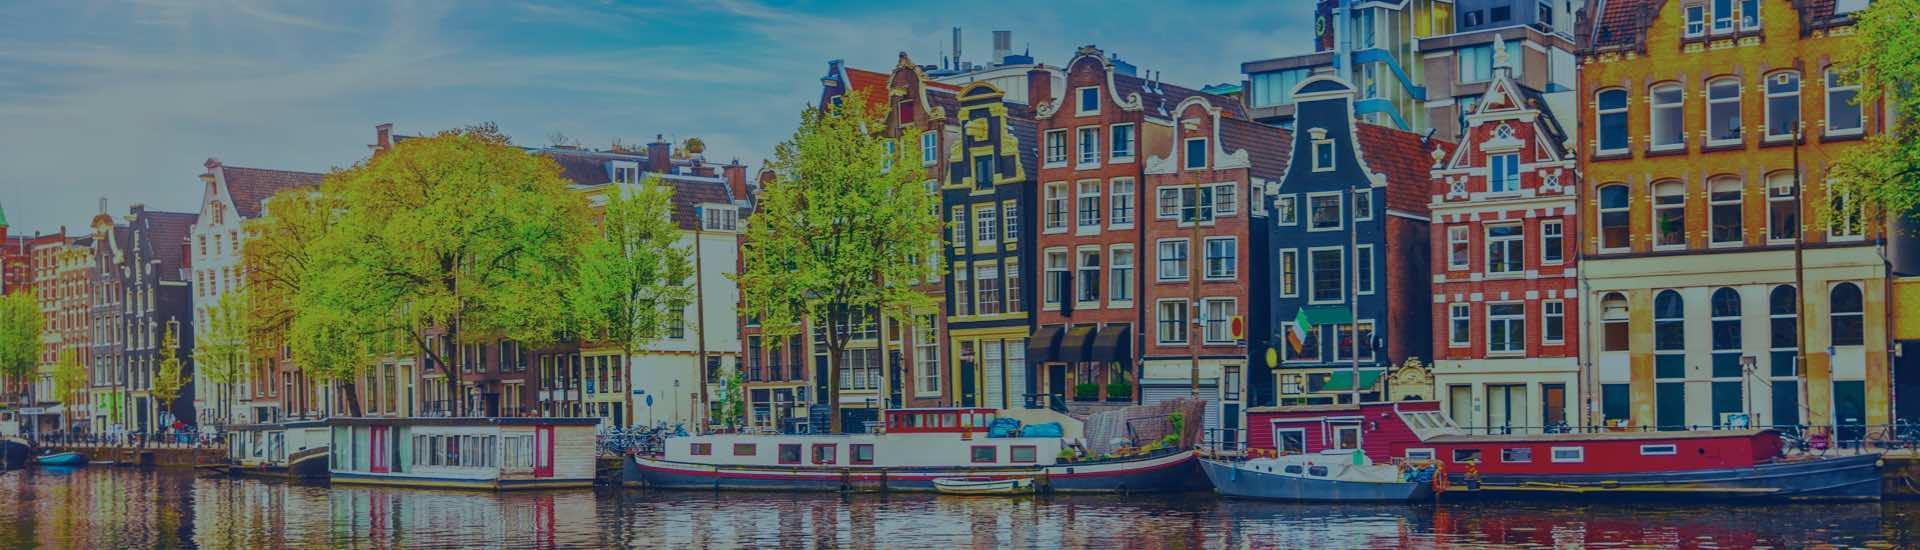 Find and Book Any Hotel in Amsterdam